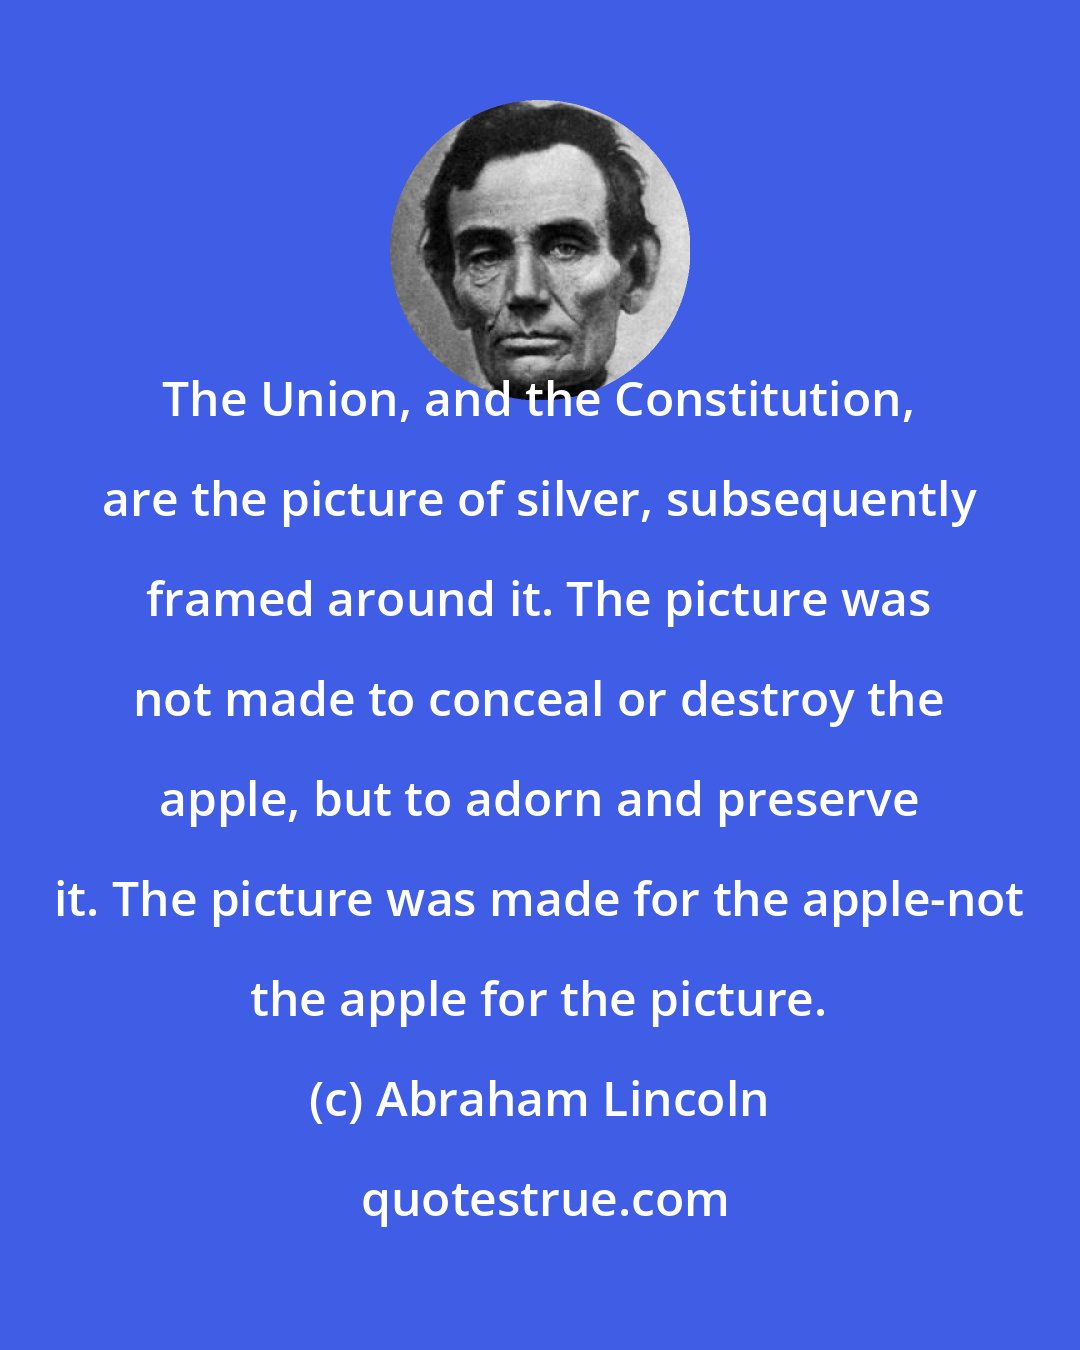 Abraham Lincoln: The Union, and the Constitution, are the picture of silver, subsequently framed around it. The picture was not made to conceal or destroy the apple, but to adorn and preserve it. The picture was made for the apple-not the apple for the picture.